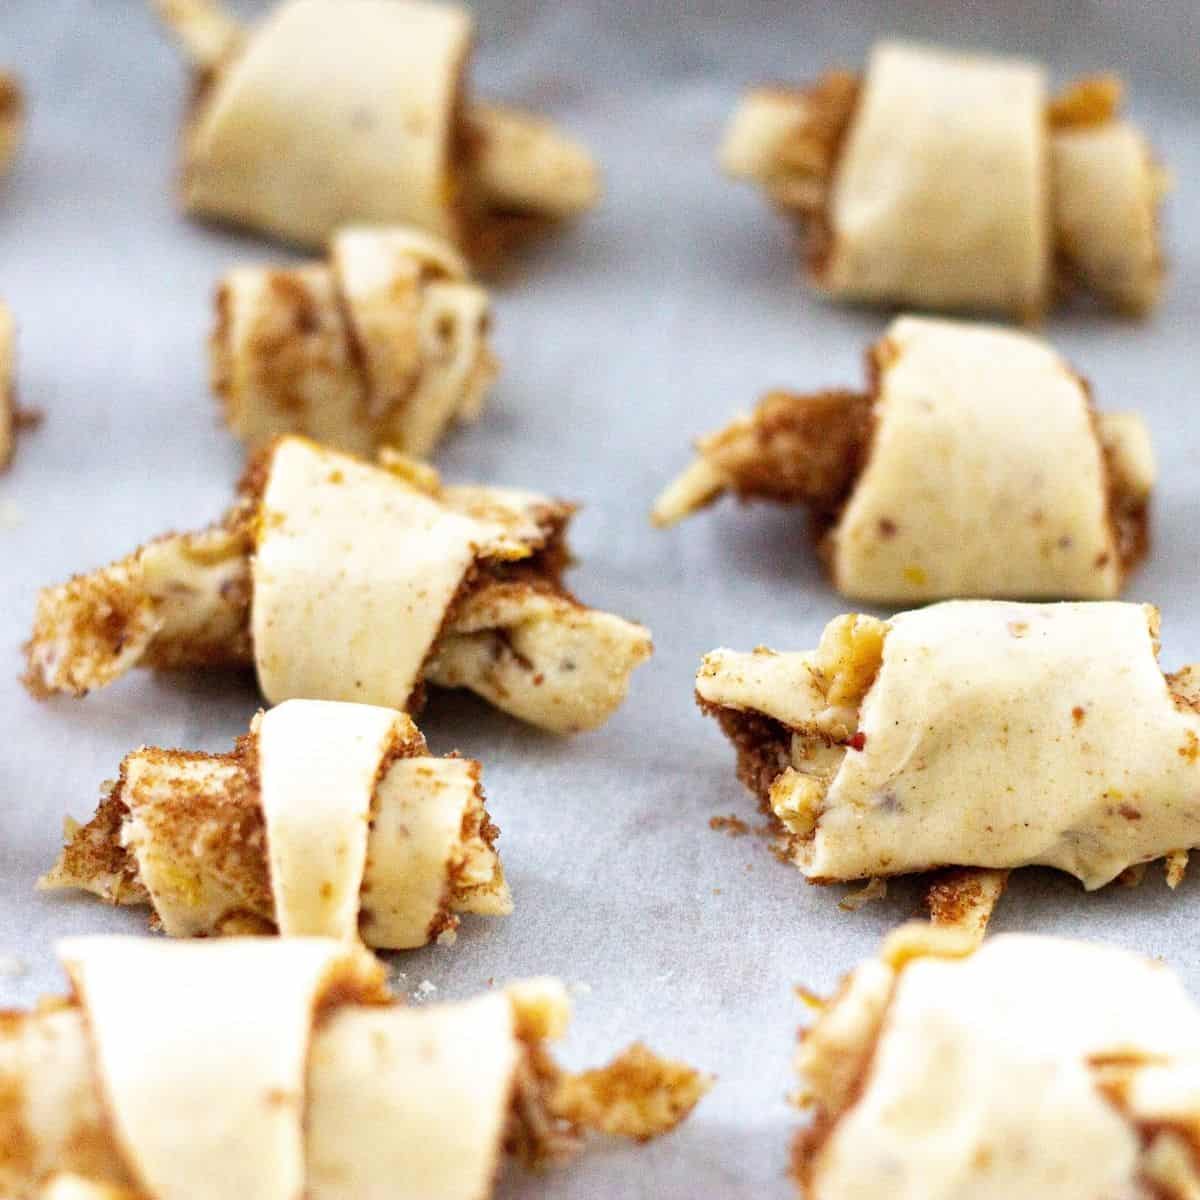 Rugelach rolled up ready to bake